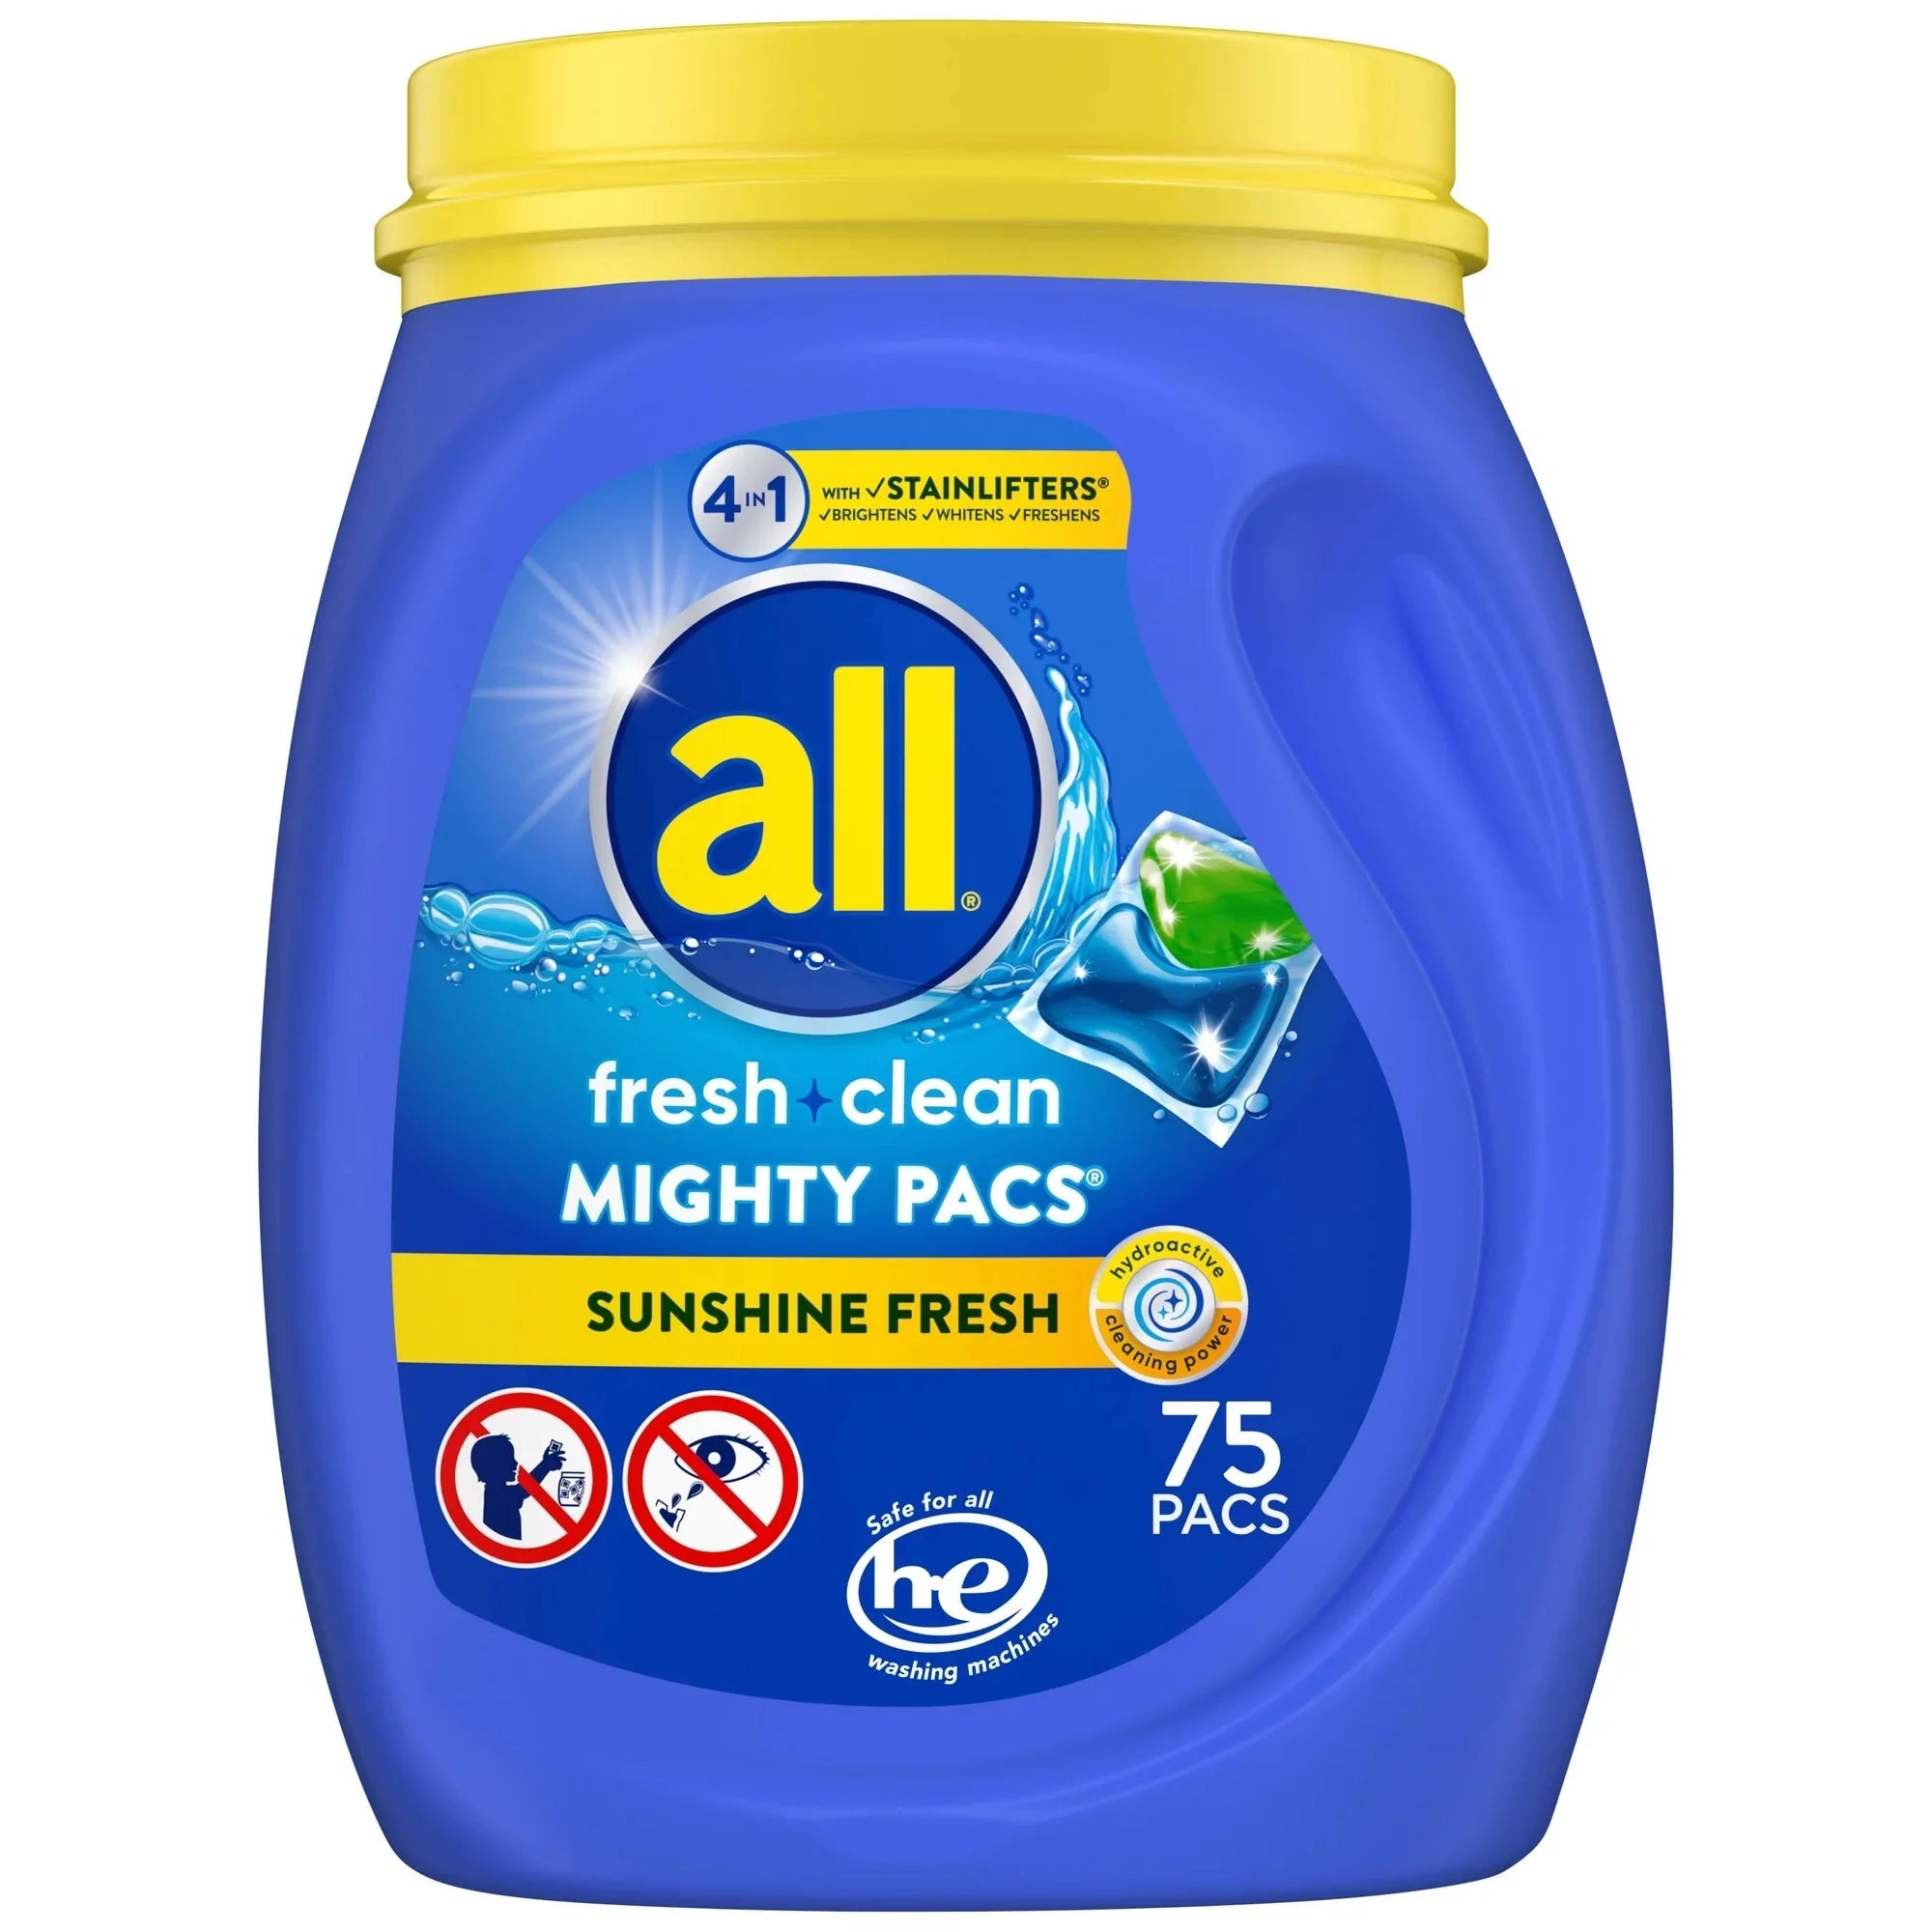 Wholesale prices with free shipping all over United States all Mighty Pacs Laundry Detergent Pacs, Fresh Clean 4 in 1 with Stainlifters, Sunshine Fresh, 75 Count - Steven Deals